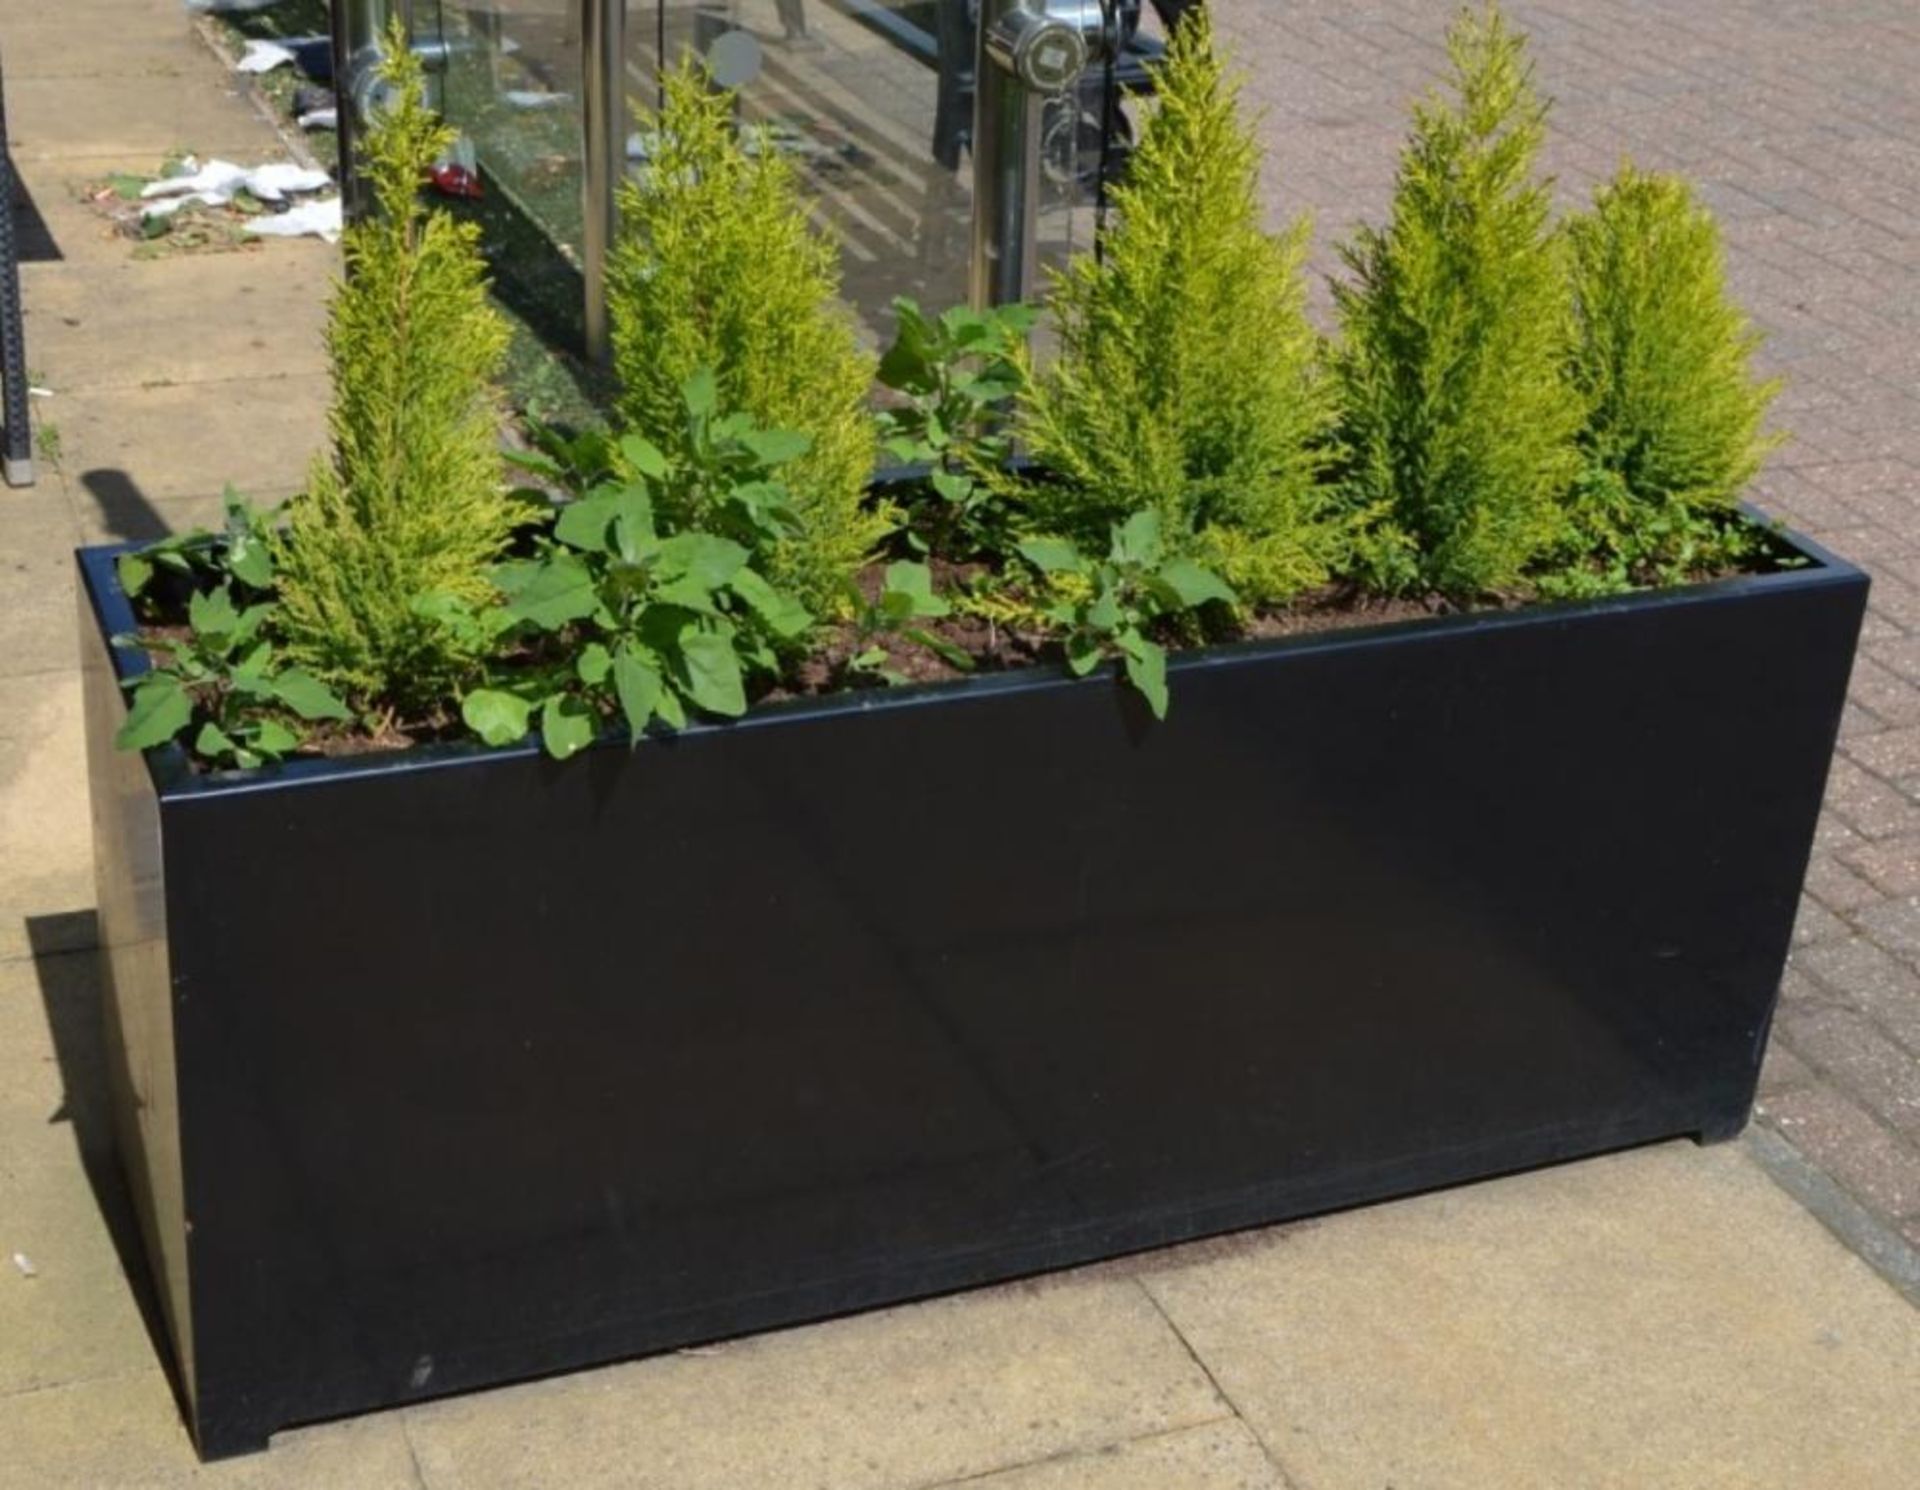 1 x Rectangular Outdoor Planter in Black With Small Conifer Trees - Planter Size H55 x W136 x D41